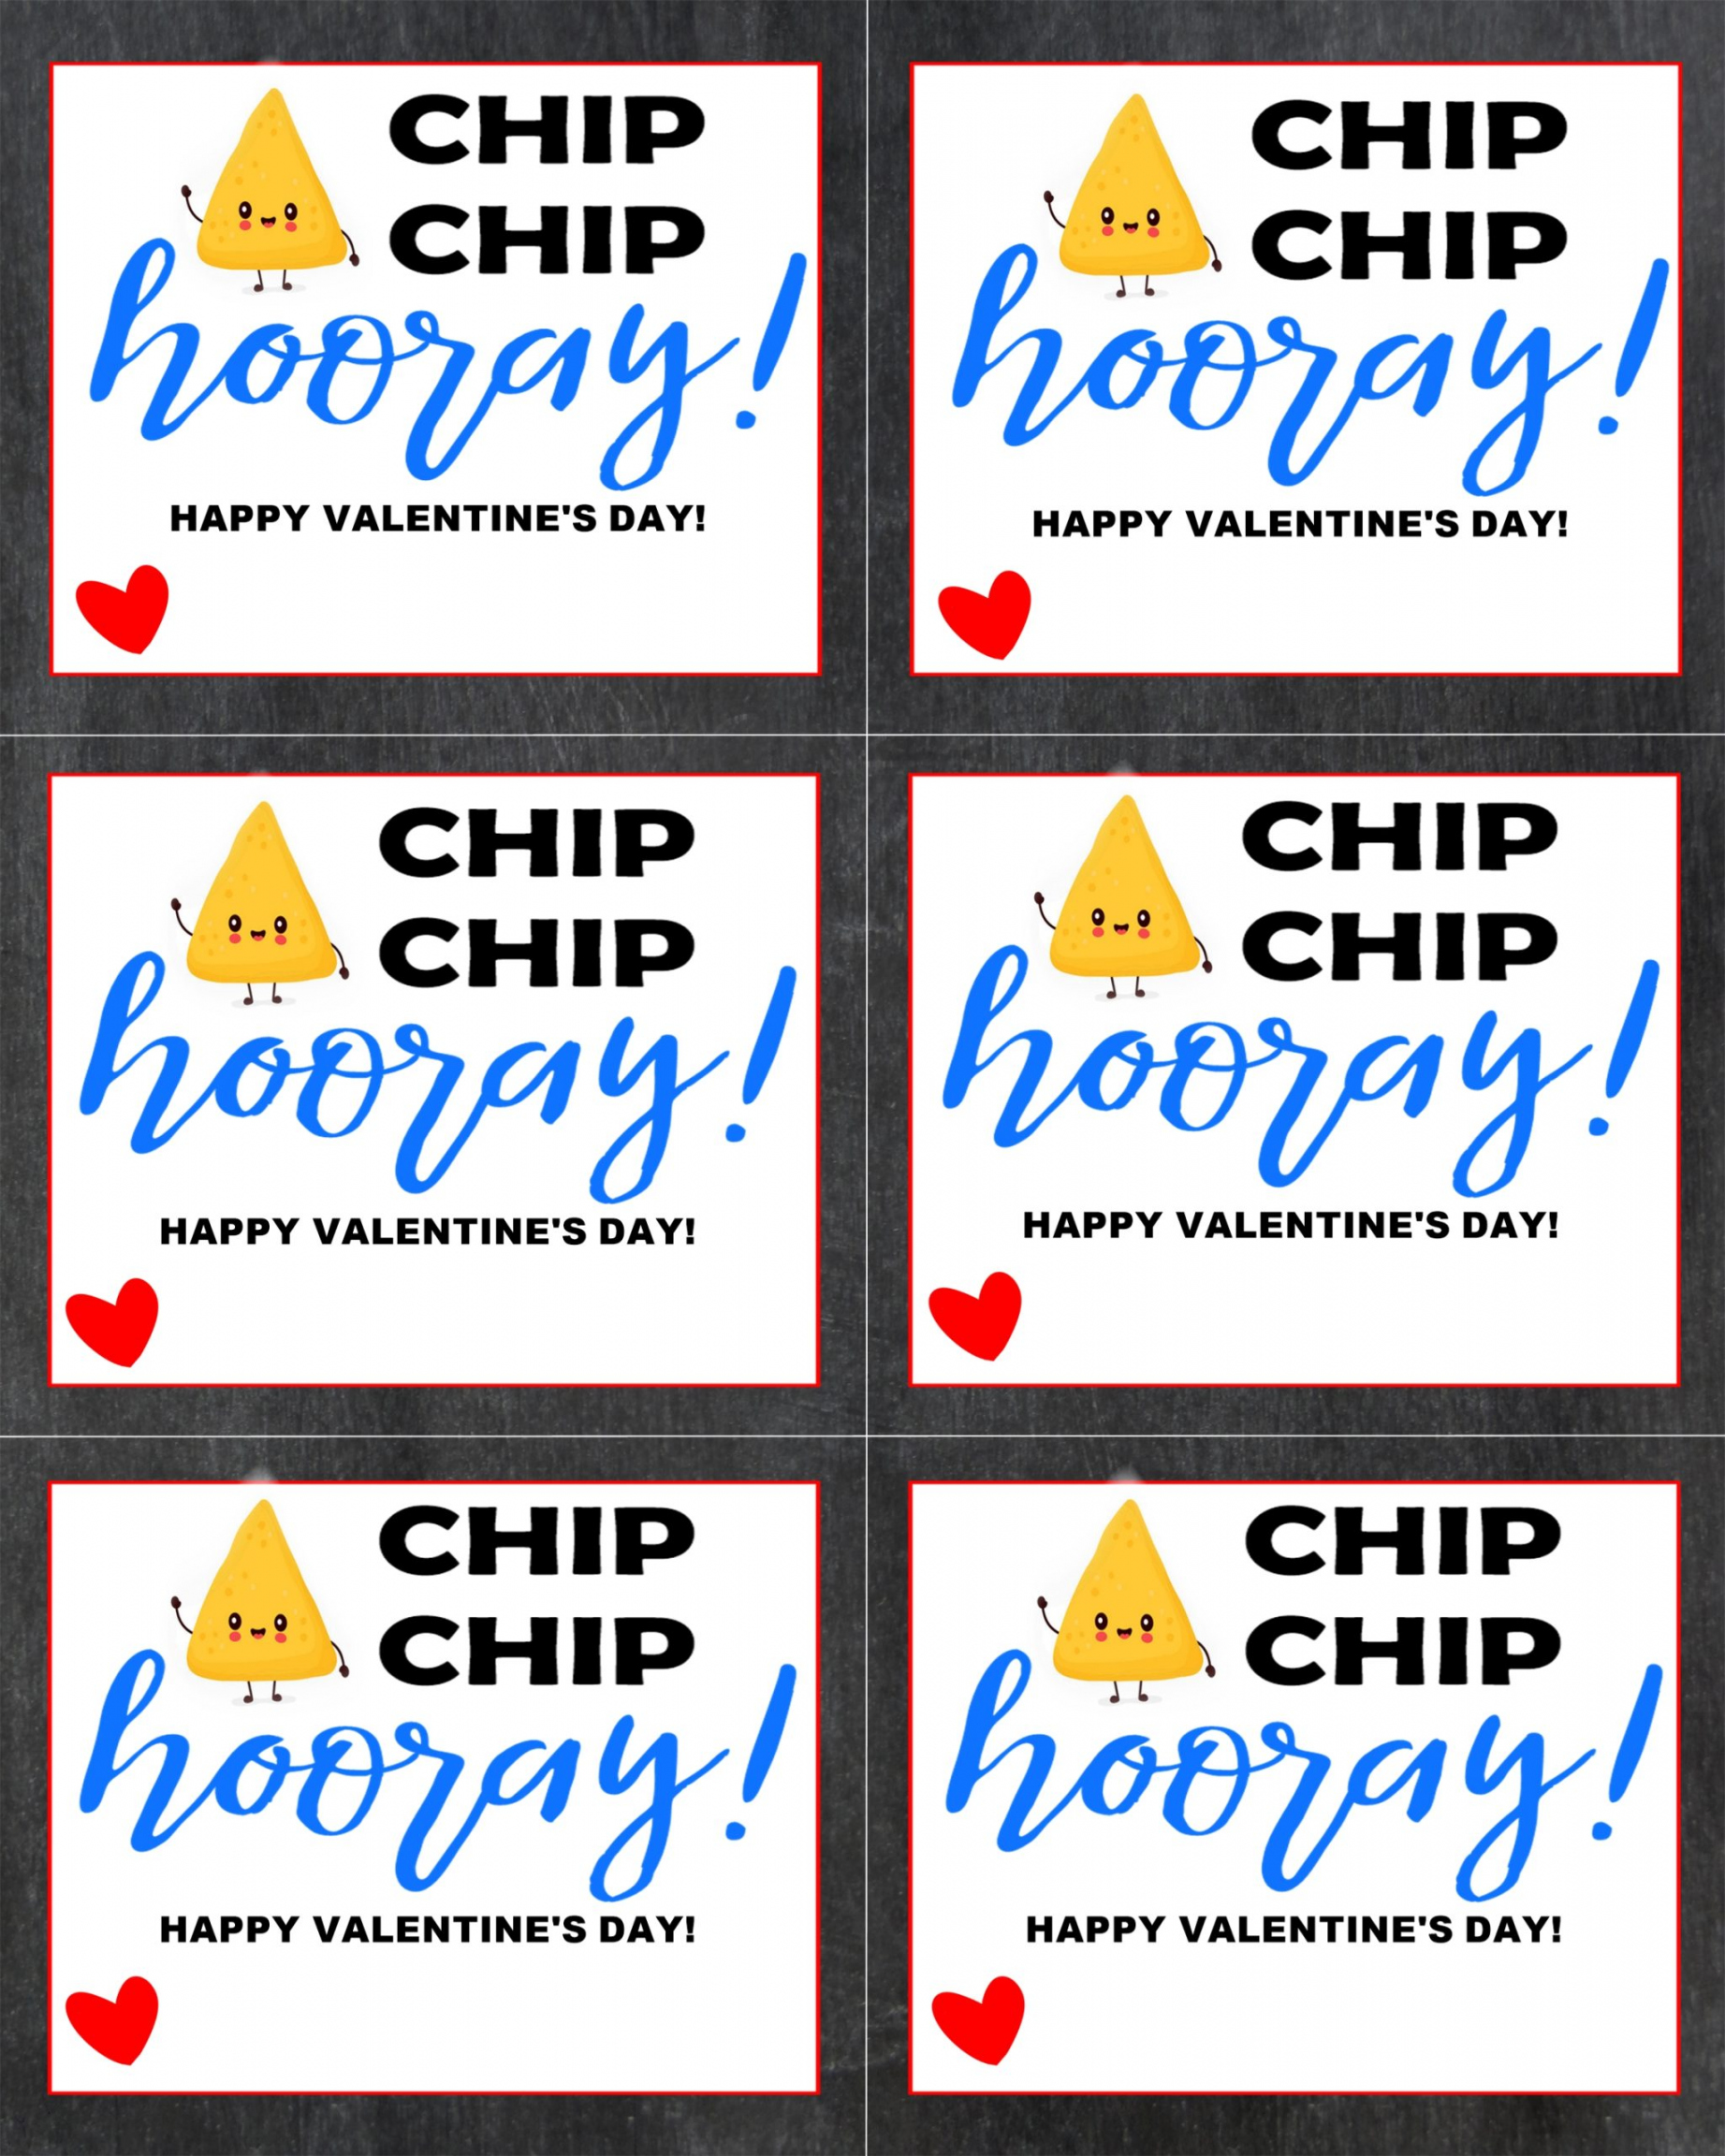 Chip chip hooray - Crisp Collective - FREE Printables - Chip Chip Hooray Free Printable